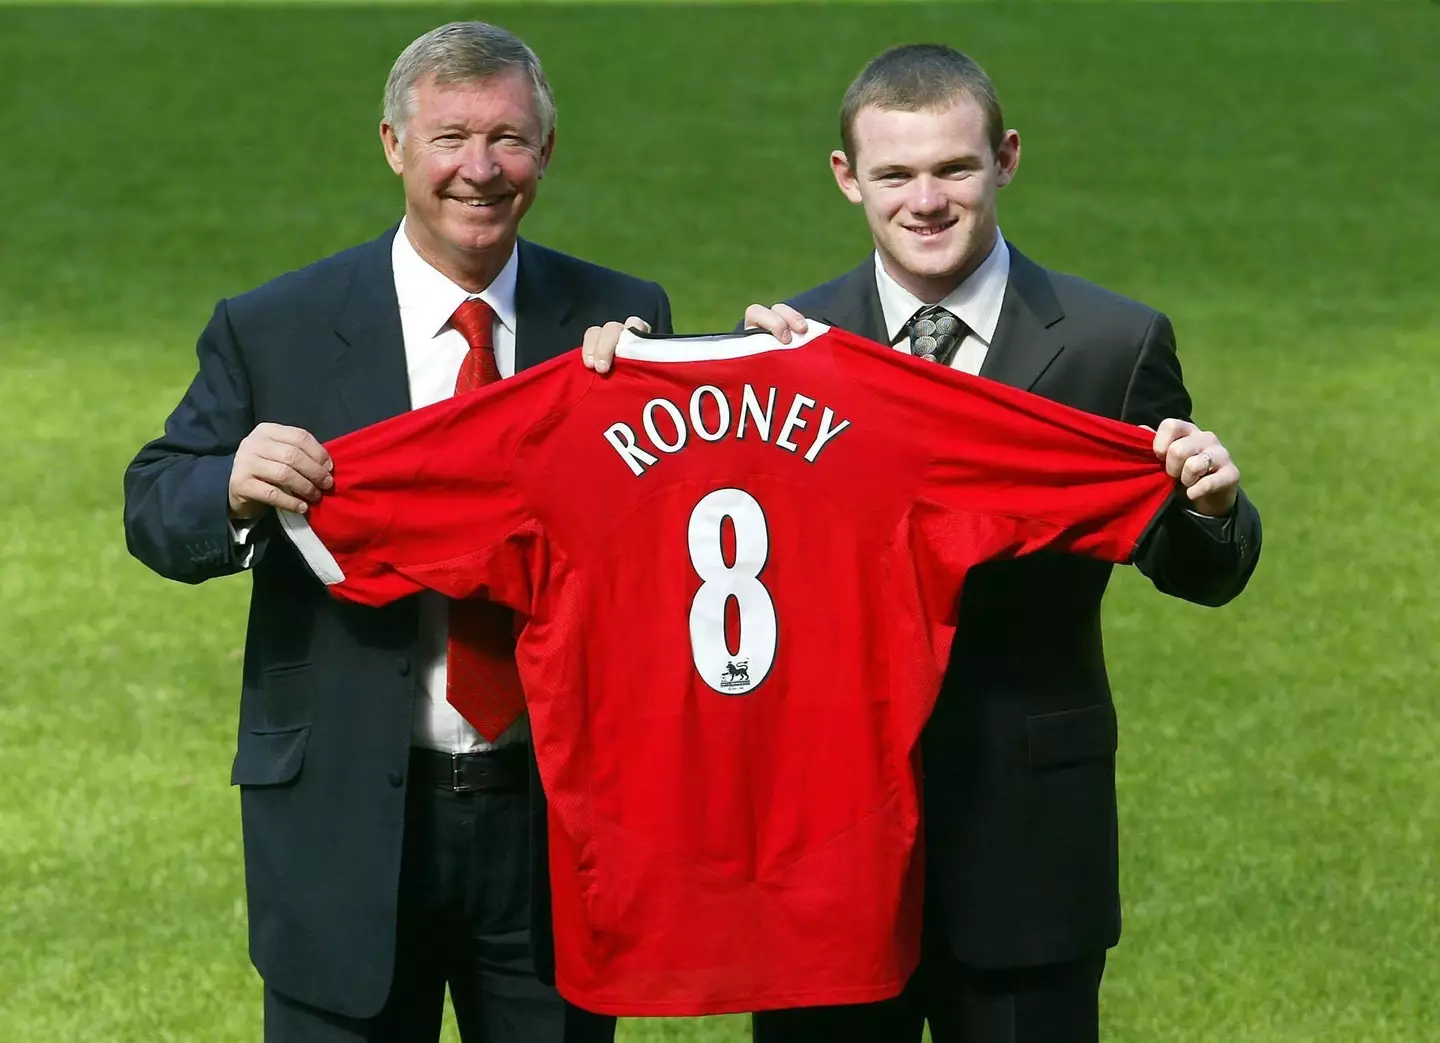 Wayne Rooney had secured a lucrative move to Manchester United by the time he was 18.